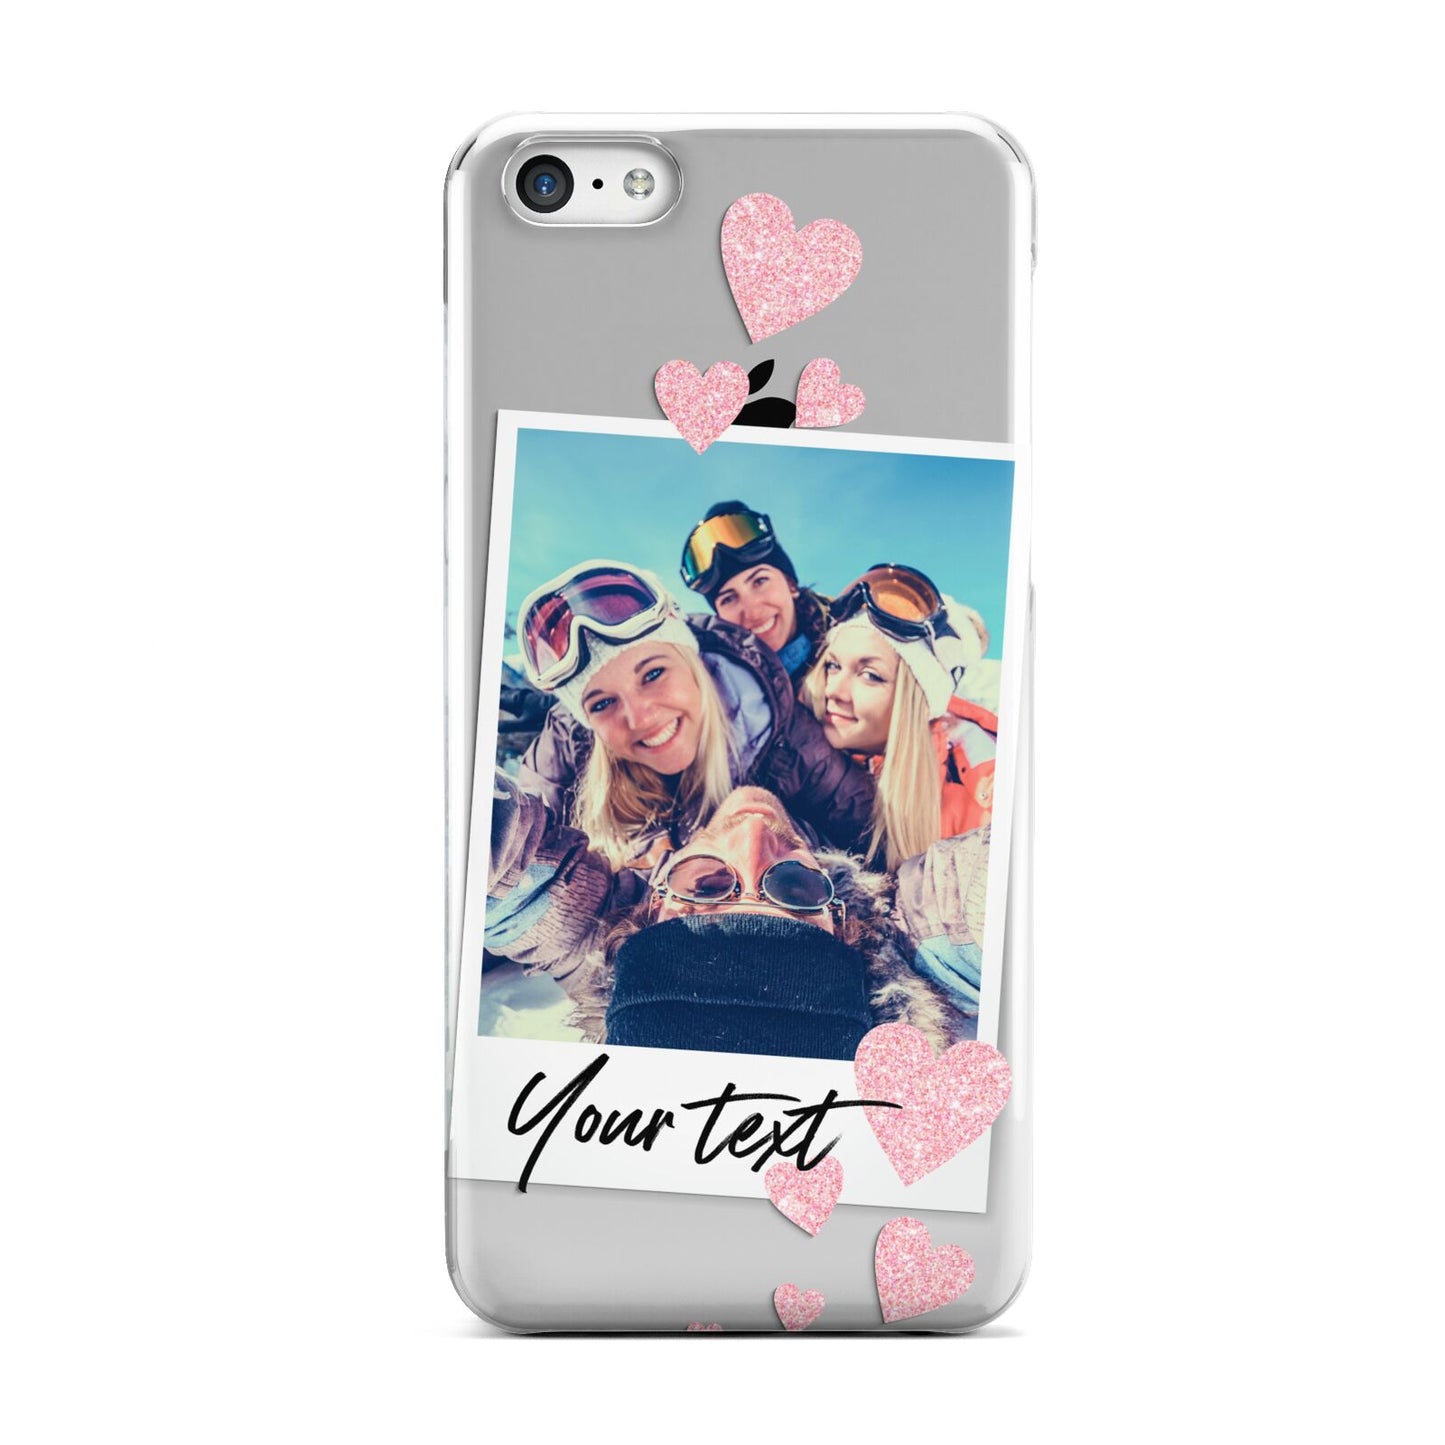 Photo with Text Apple iPhone 5c Case